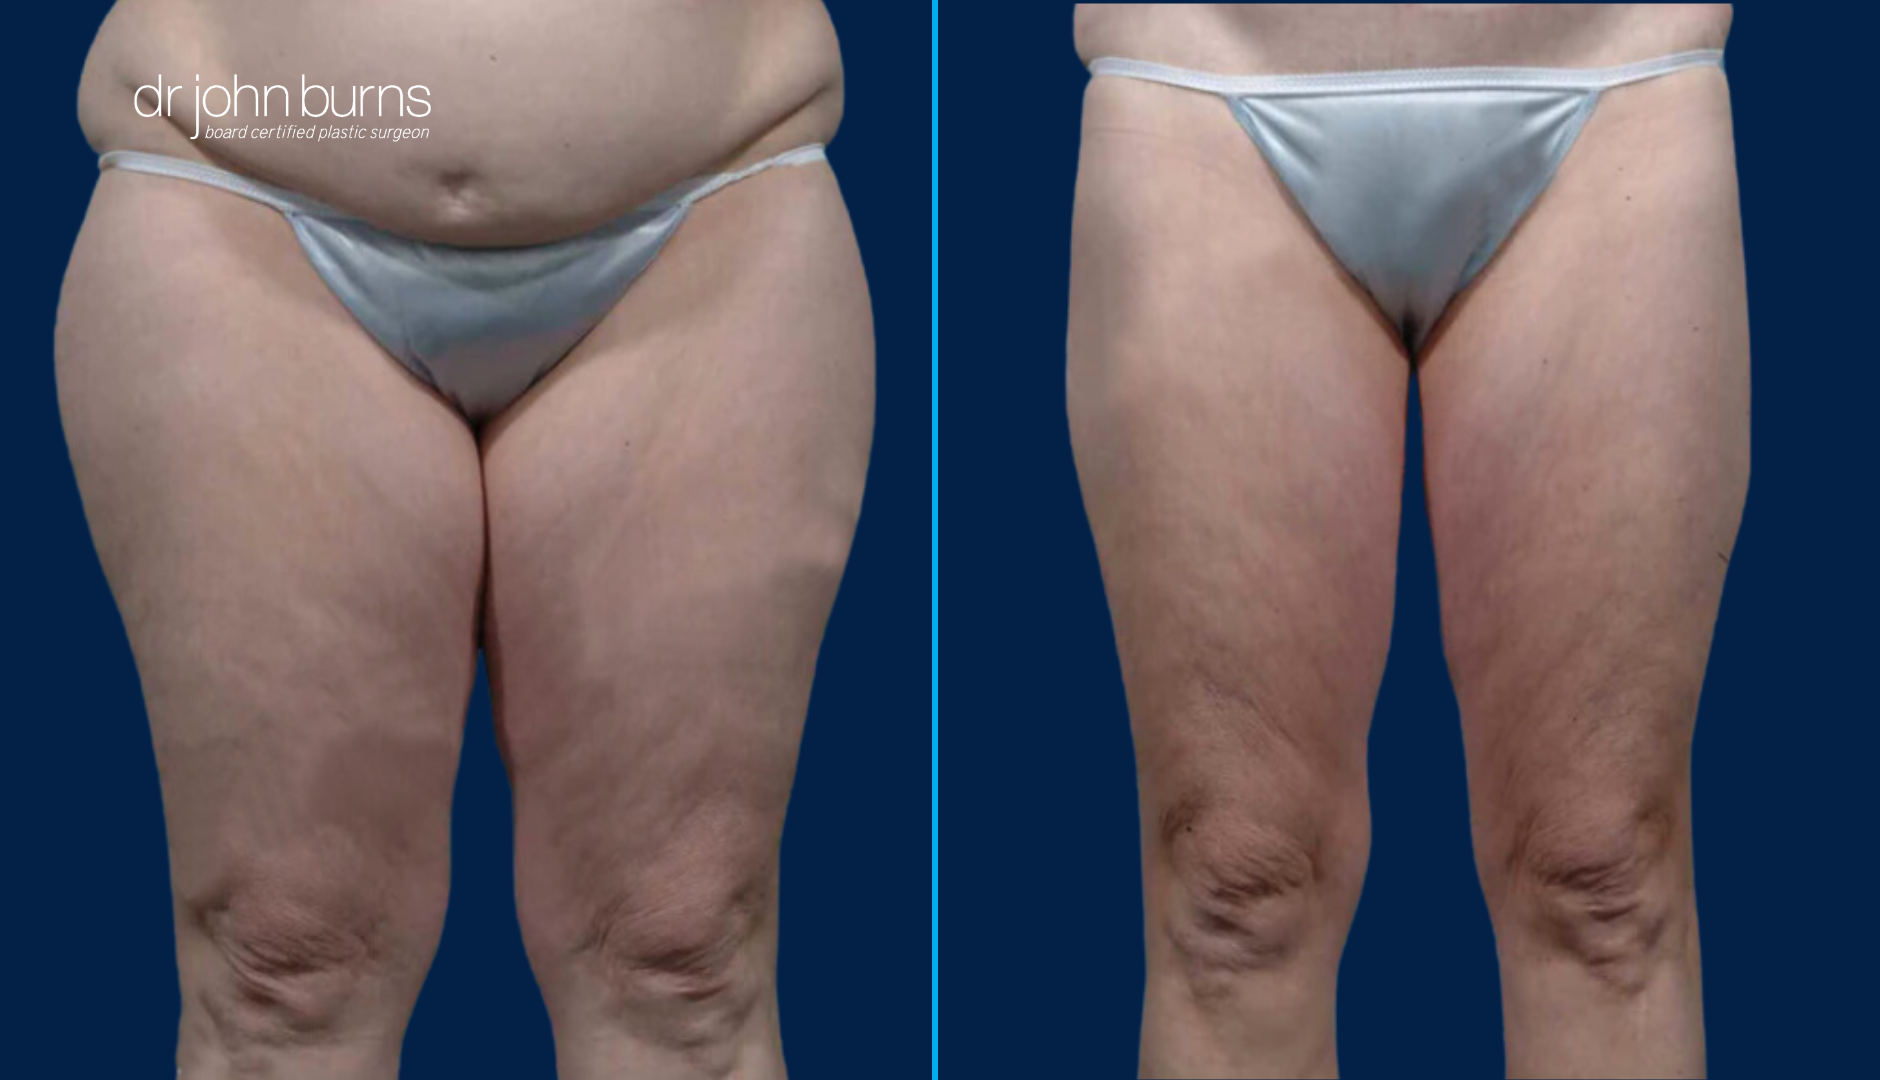 Thigh LIft before and after in Dallas, Texas.png__PID:03fe263d-516d-4b08-8736-373c33387e90